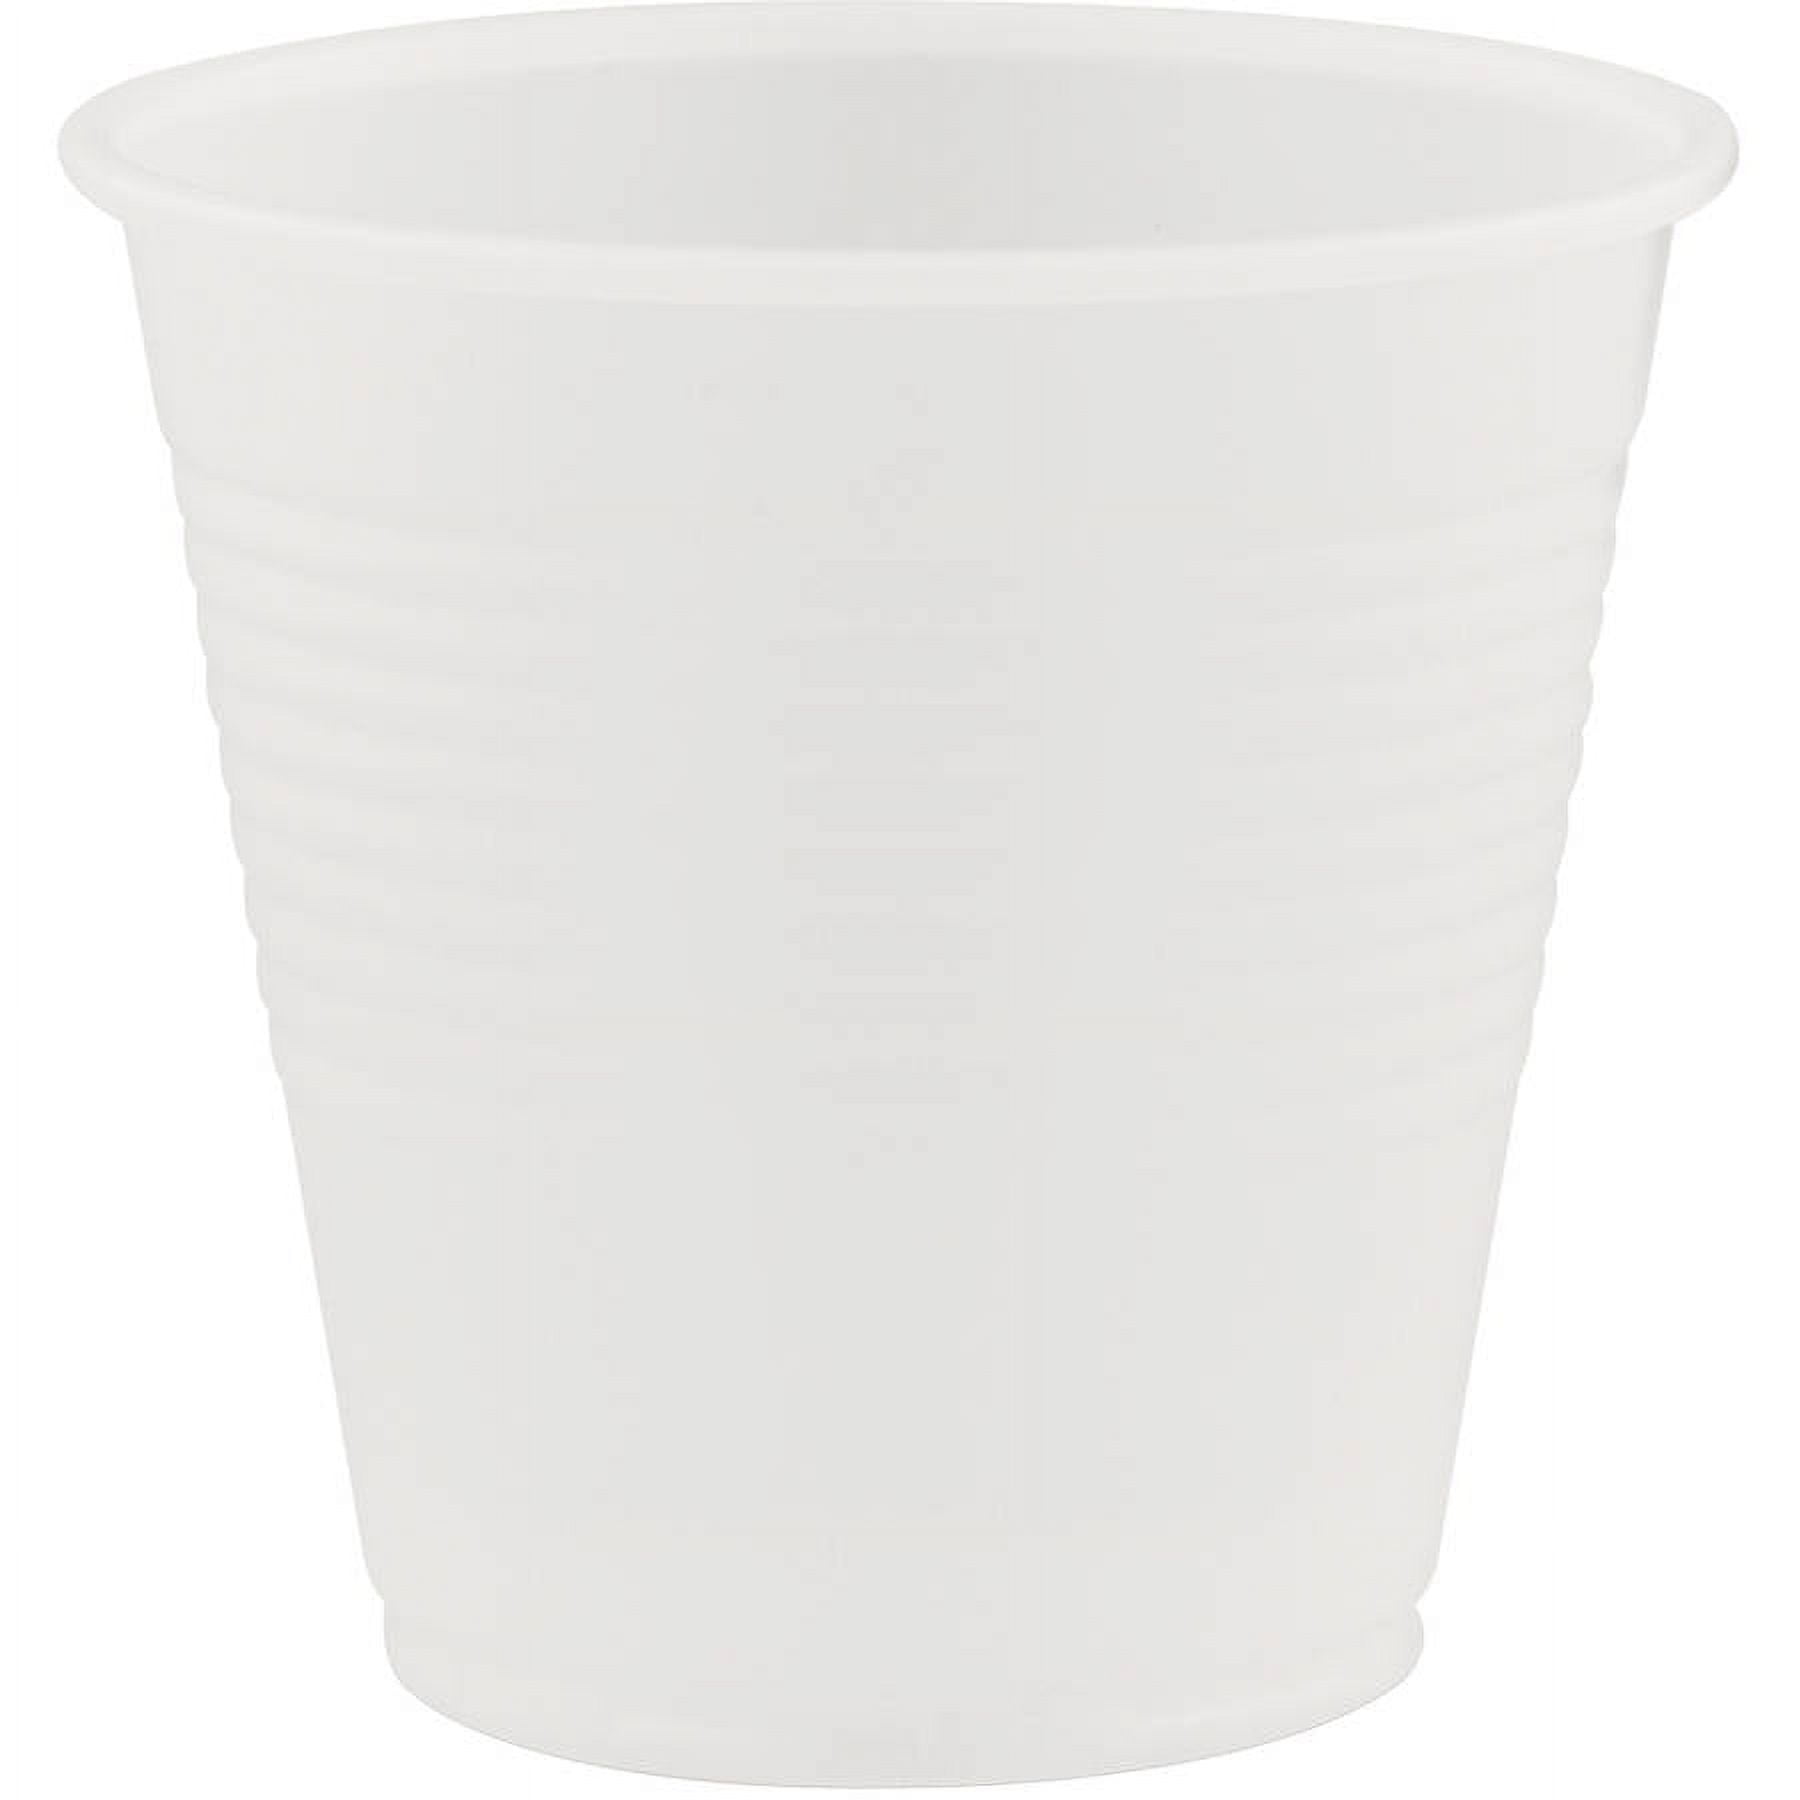 Dart Container 12oz Cold Plastic Cups, Clear, Pack of 1000 Y12S (12SNDart)